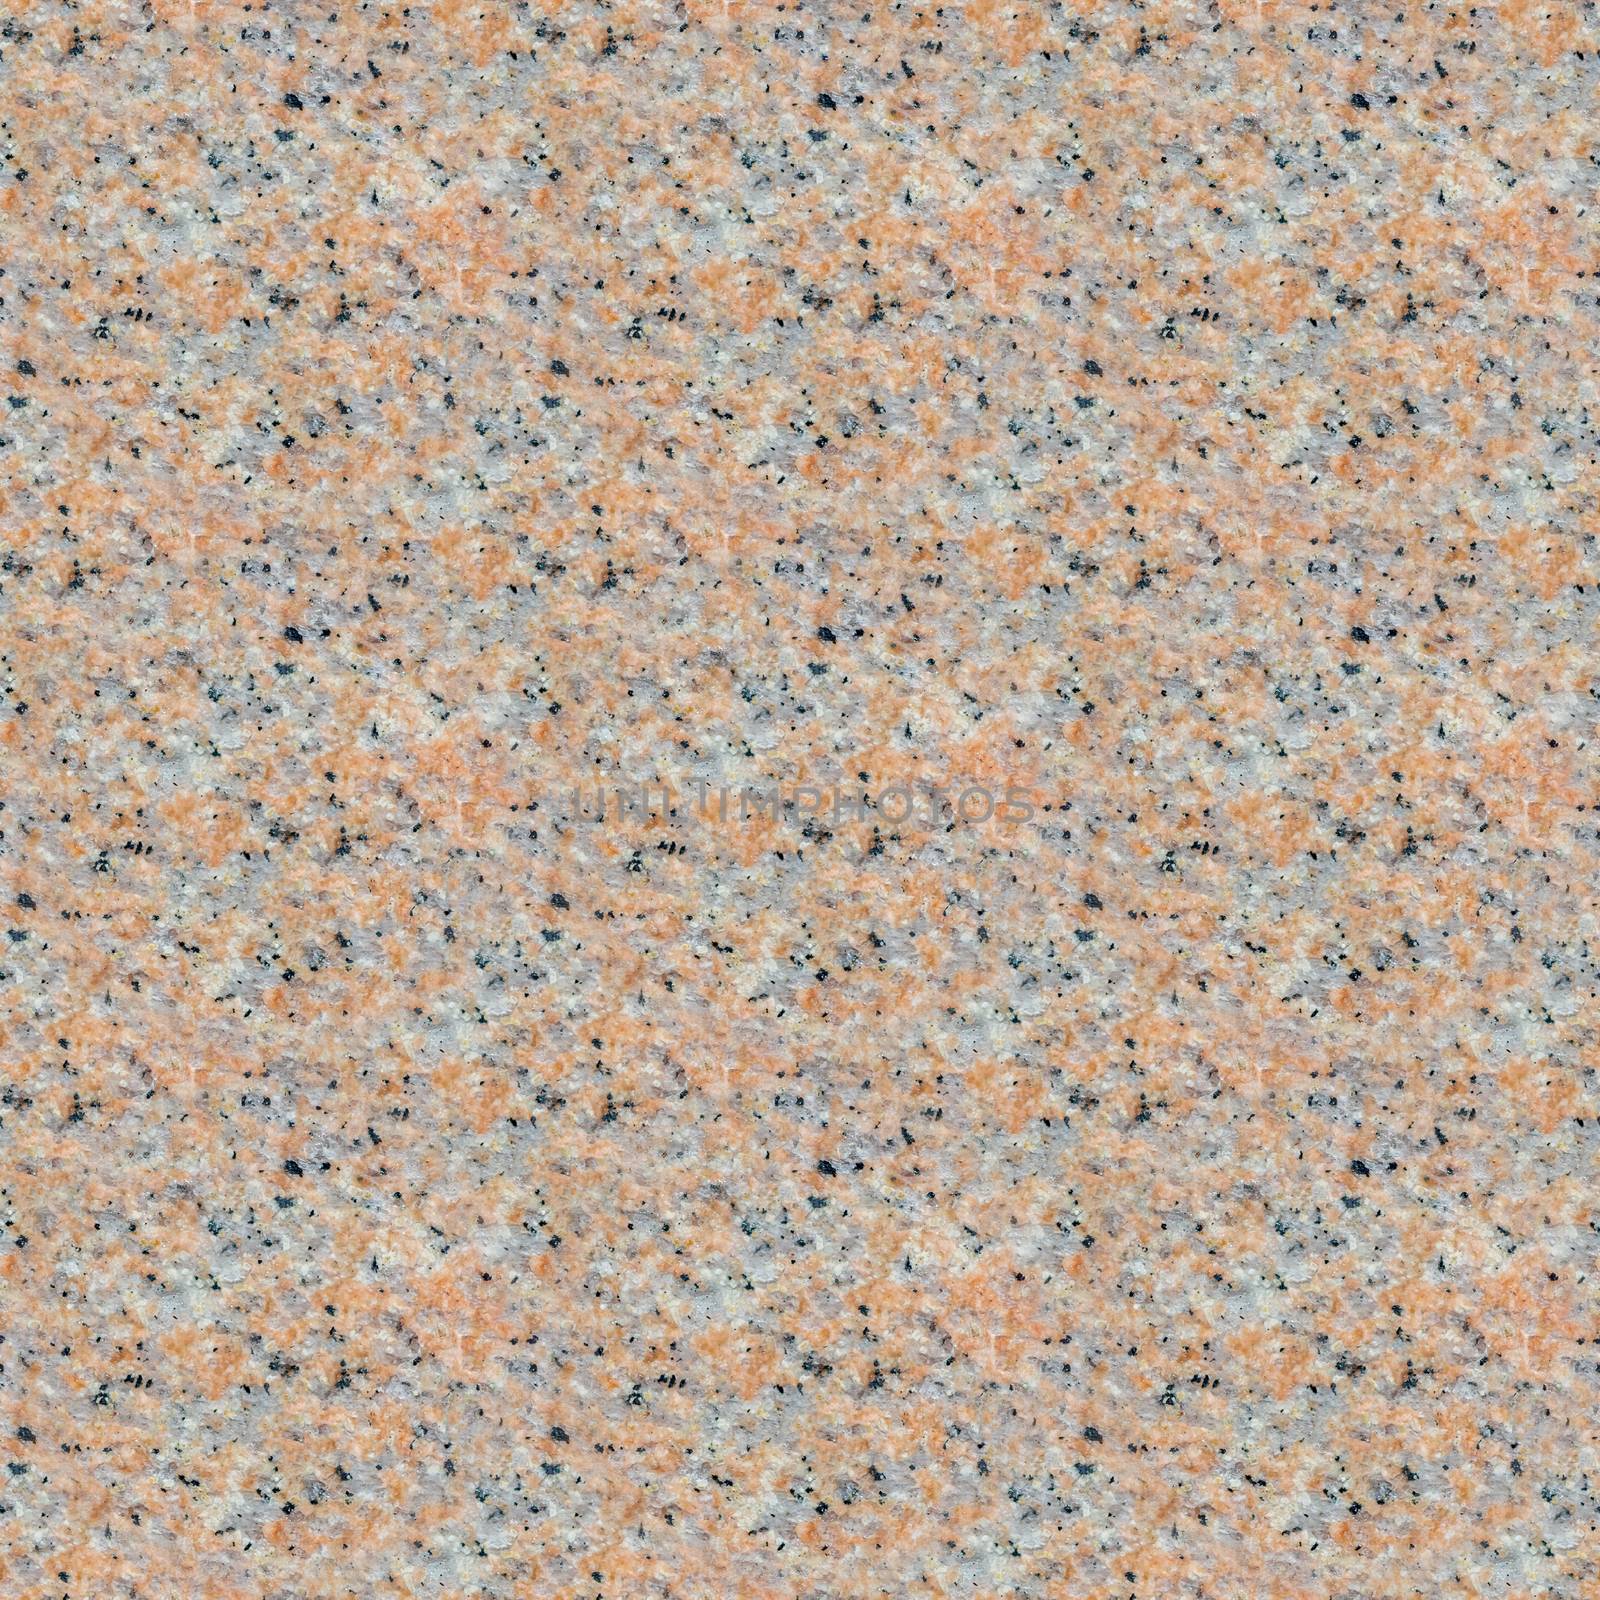 Seamless texture of the surface of natural stone - coral gray granite. Seamless pattern, background - photo, image.